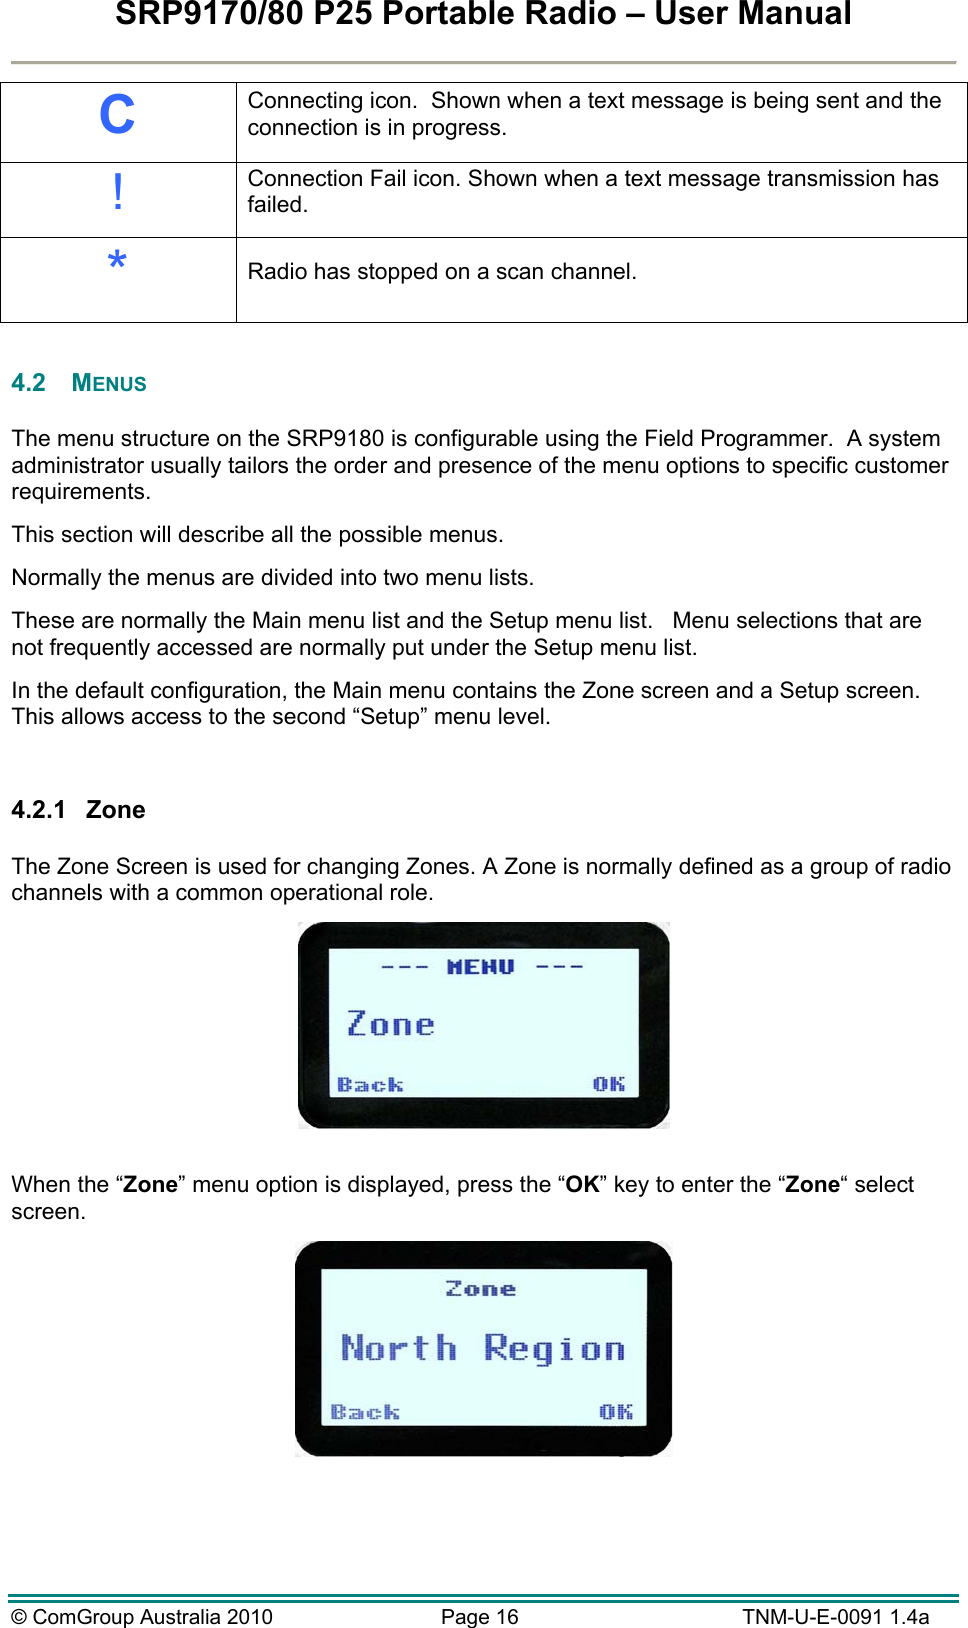 SRP9170/80 P25 Portable Radio – User Manual  © ComGroup Australia 2010  Page 16   TNM-U-E-0091 1.4a C Connecting icon.  Shown when a text message is being sent and the connection is in progress. ! Connection Fail icon. Shown when a text message transmission has failed. *  Radio has stopped on a scan channel.  4.2 MENUS  The menu structure on the SRP9180 is configurable using the Field Programmer.  A system administrator usually tailors the order and presence of the menu options to specific customer requirements.   This section will describe all the possible menus.    Normally the menus are divided into two menu lists.   These are normally the Main menu list and the Setup menu list.   Menu selections that are not frequently accessed are normally put under the Setup menu list. In the default configuration, the Main menu contains the Zone screen and a Setup screen.  This allows access to the second “Setup” menu level.   4.2.1 Zone  The Zone Screen is used for changing Zones. A Zone is normally defined as a group of radio channels with a common operational role.   When the “Zone” menu option is displayed, press the “OK” key to enter the “Zone“ select screen.   